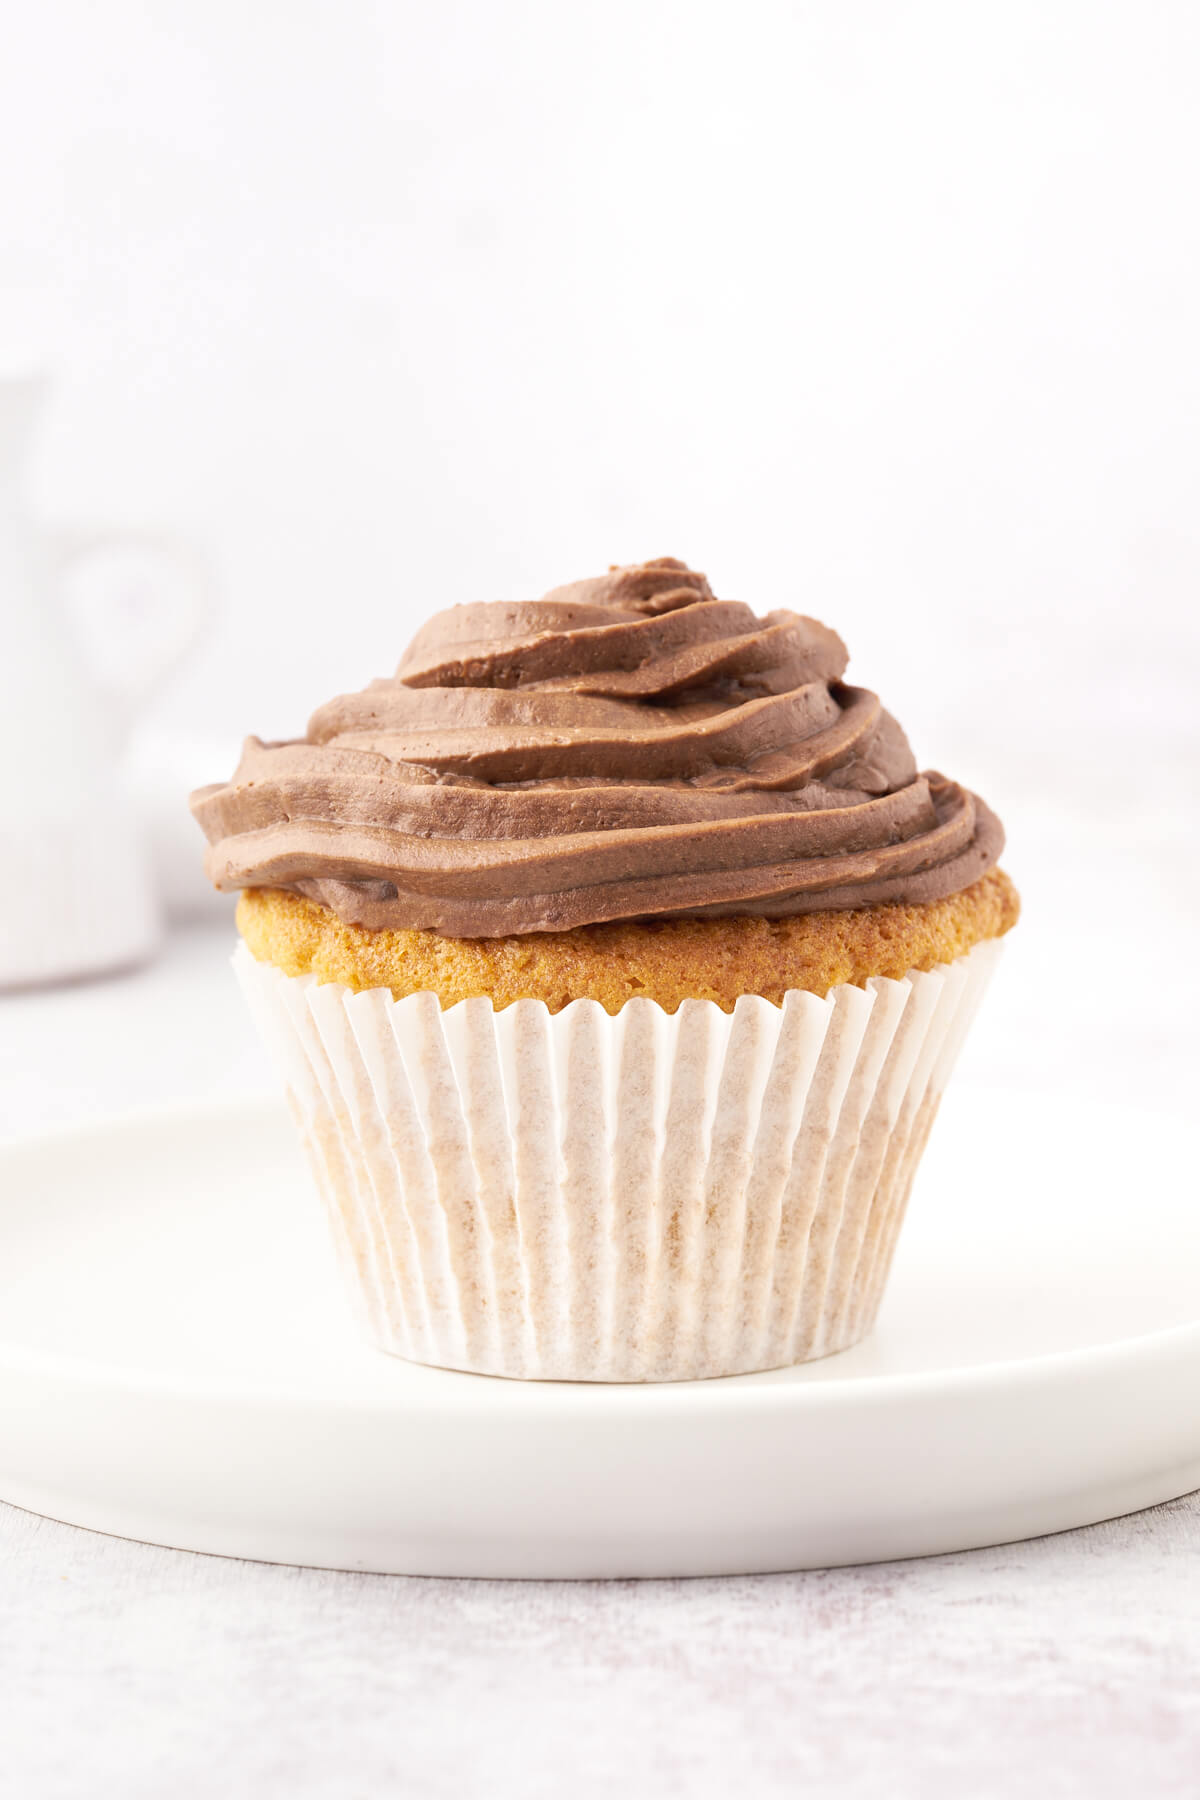 A vanilla cupcake frosted with swirled Nutella frosting.